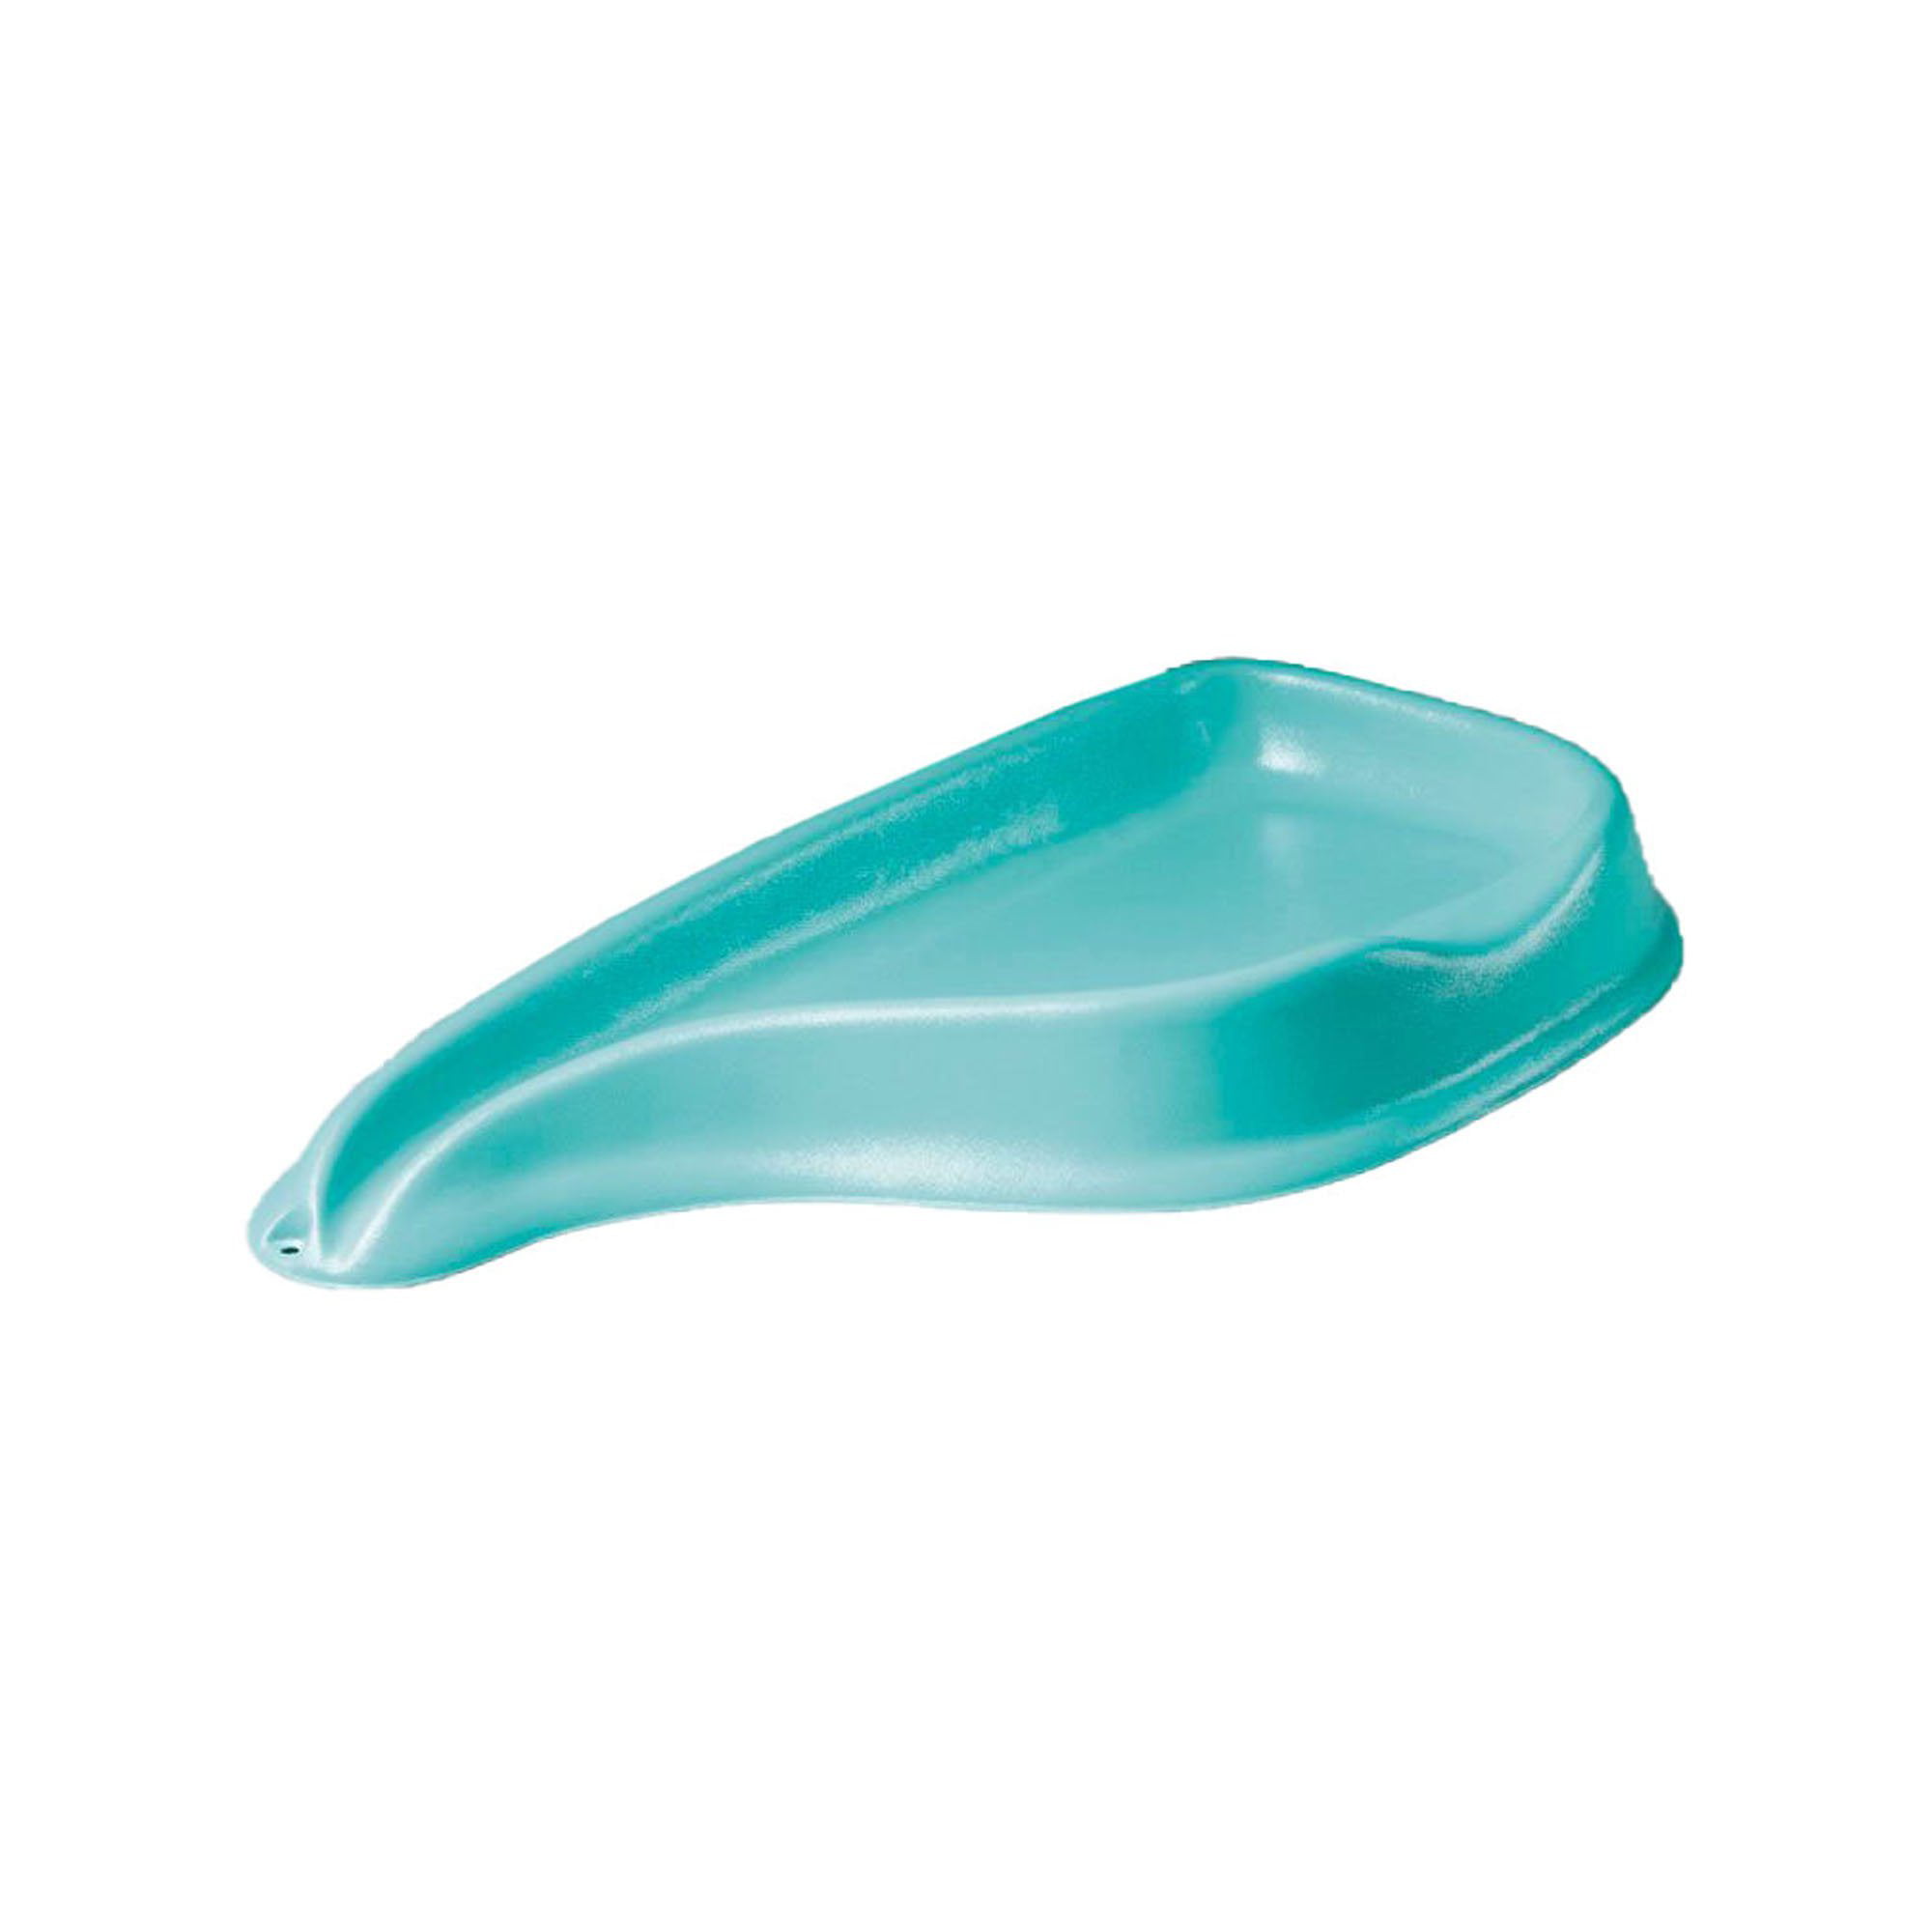 4321 Inflateable Hair Rinse Tray